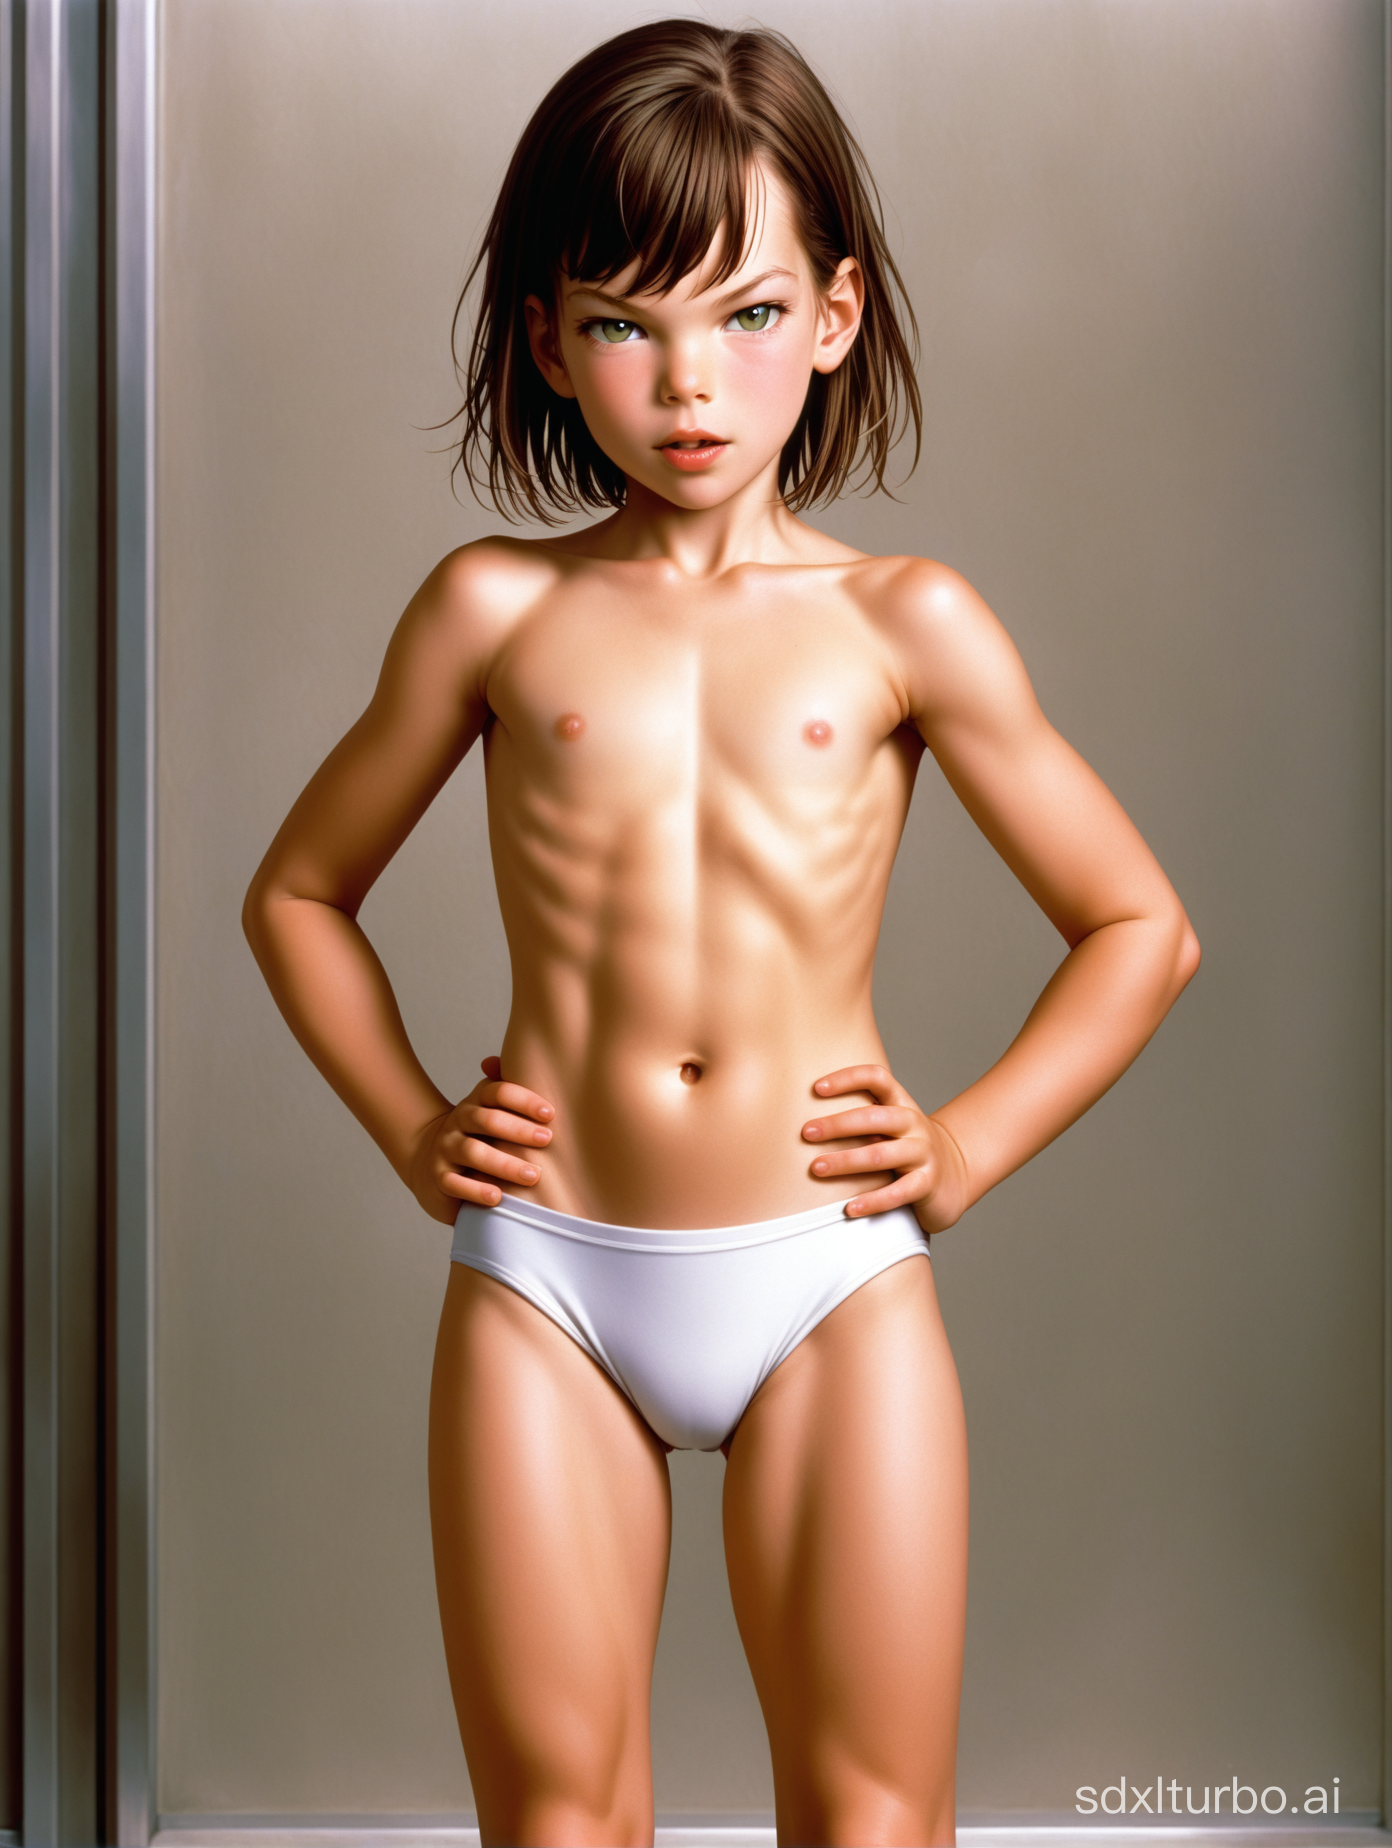 Milla Jovovich at 7 years old, flat chested, muscular abs, showing her belly, in 5th element movie